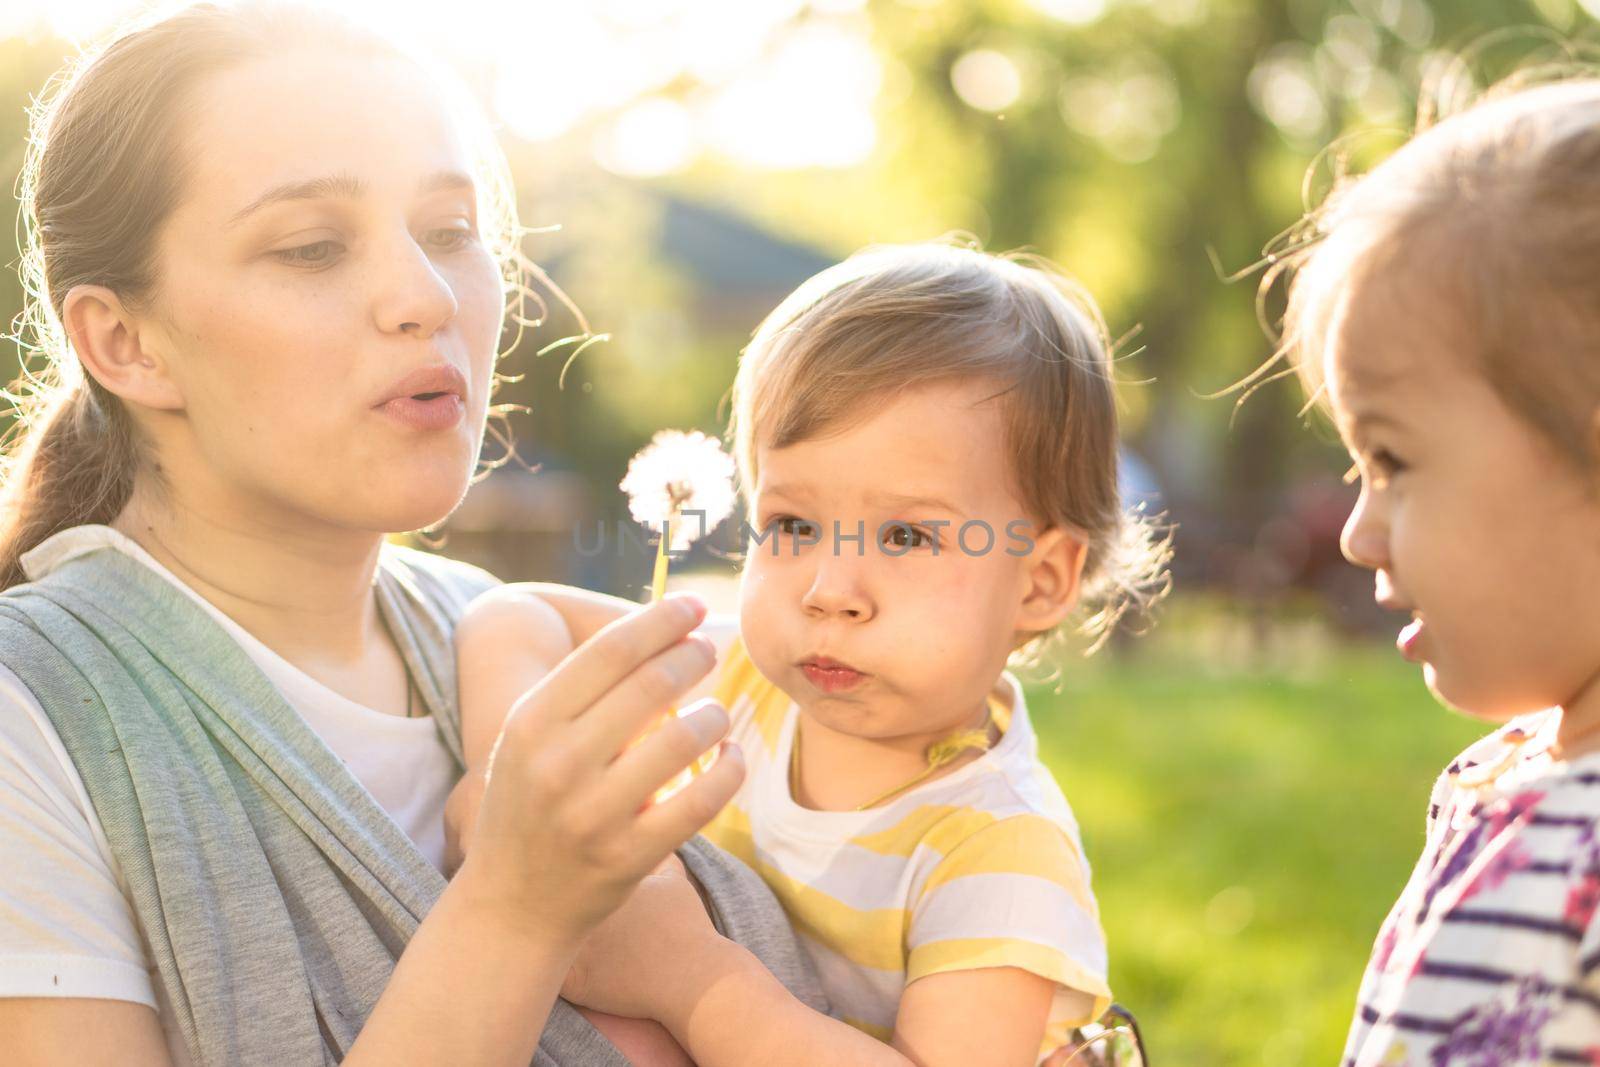 Motherhood, care, infants, summer, childhood and large families concept - Young big mom with newborn baby in sling and two small children of same age blow dandelion away in backlight of sunset in park.